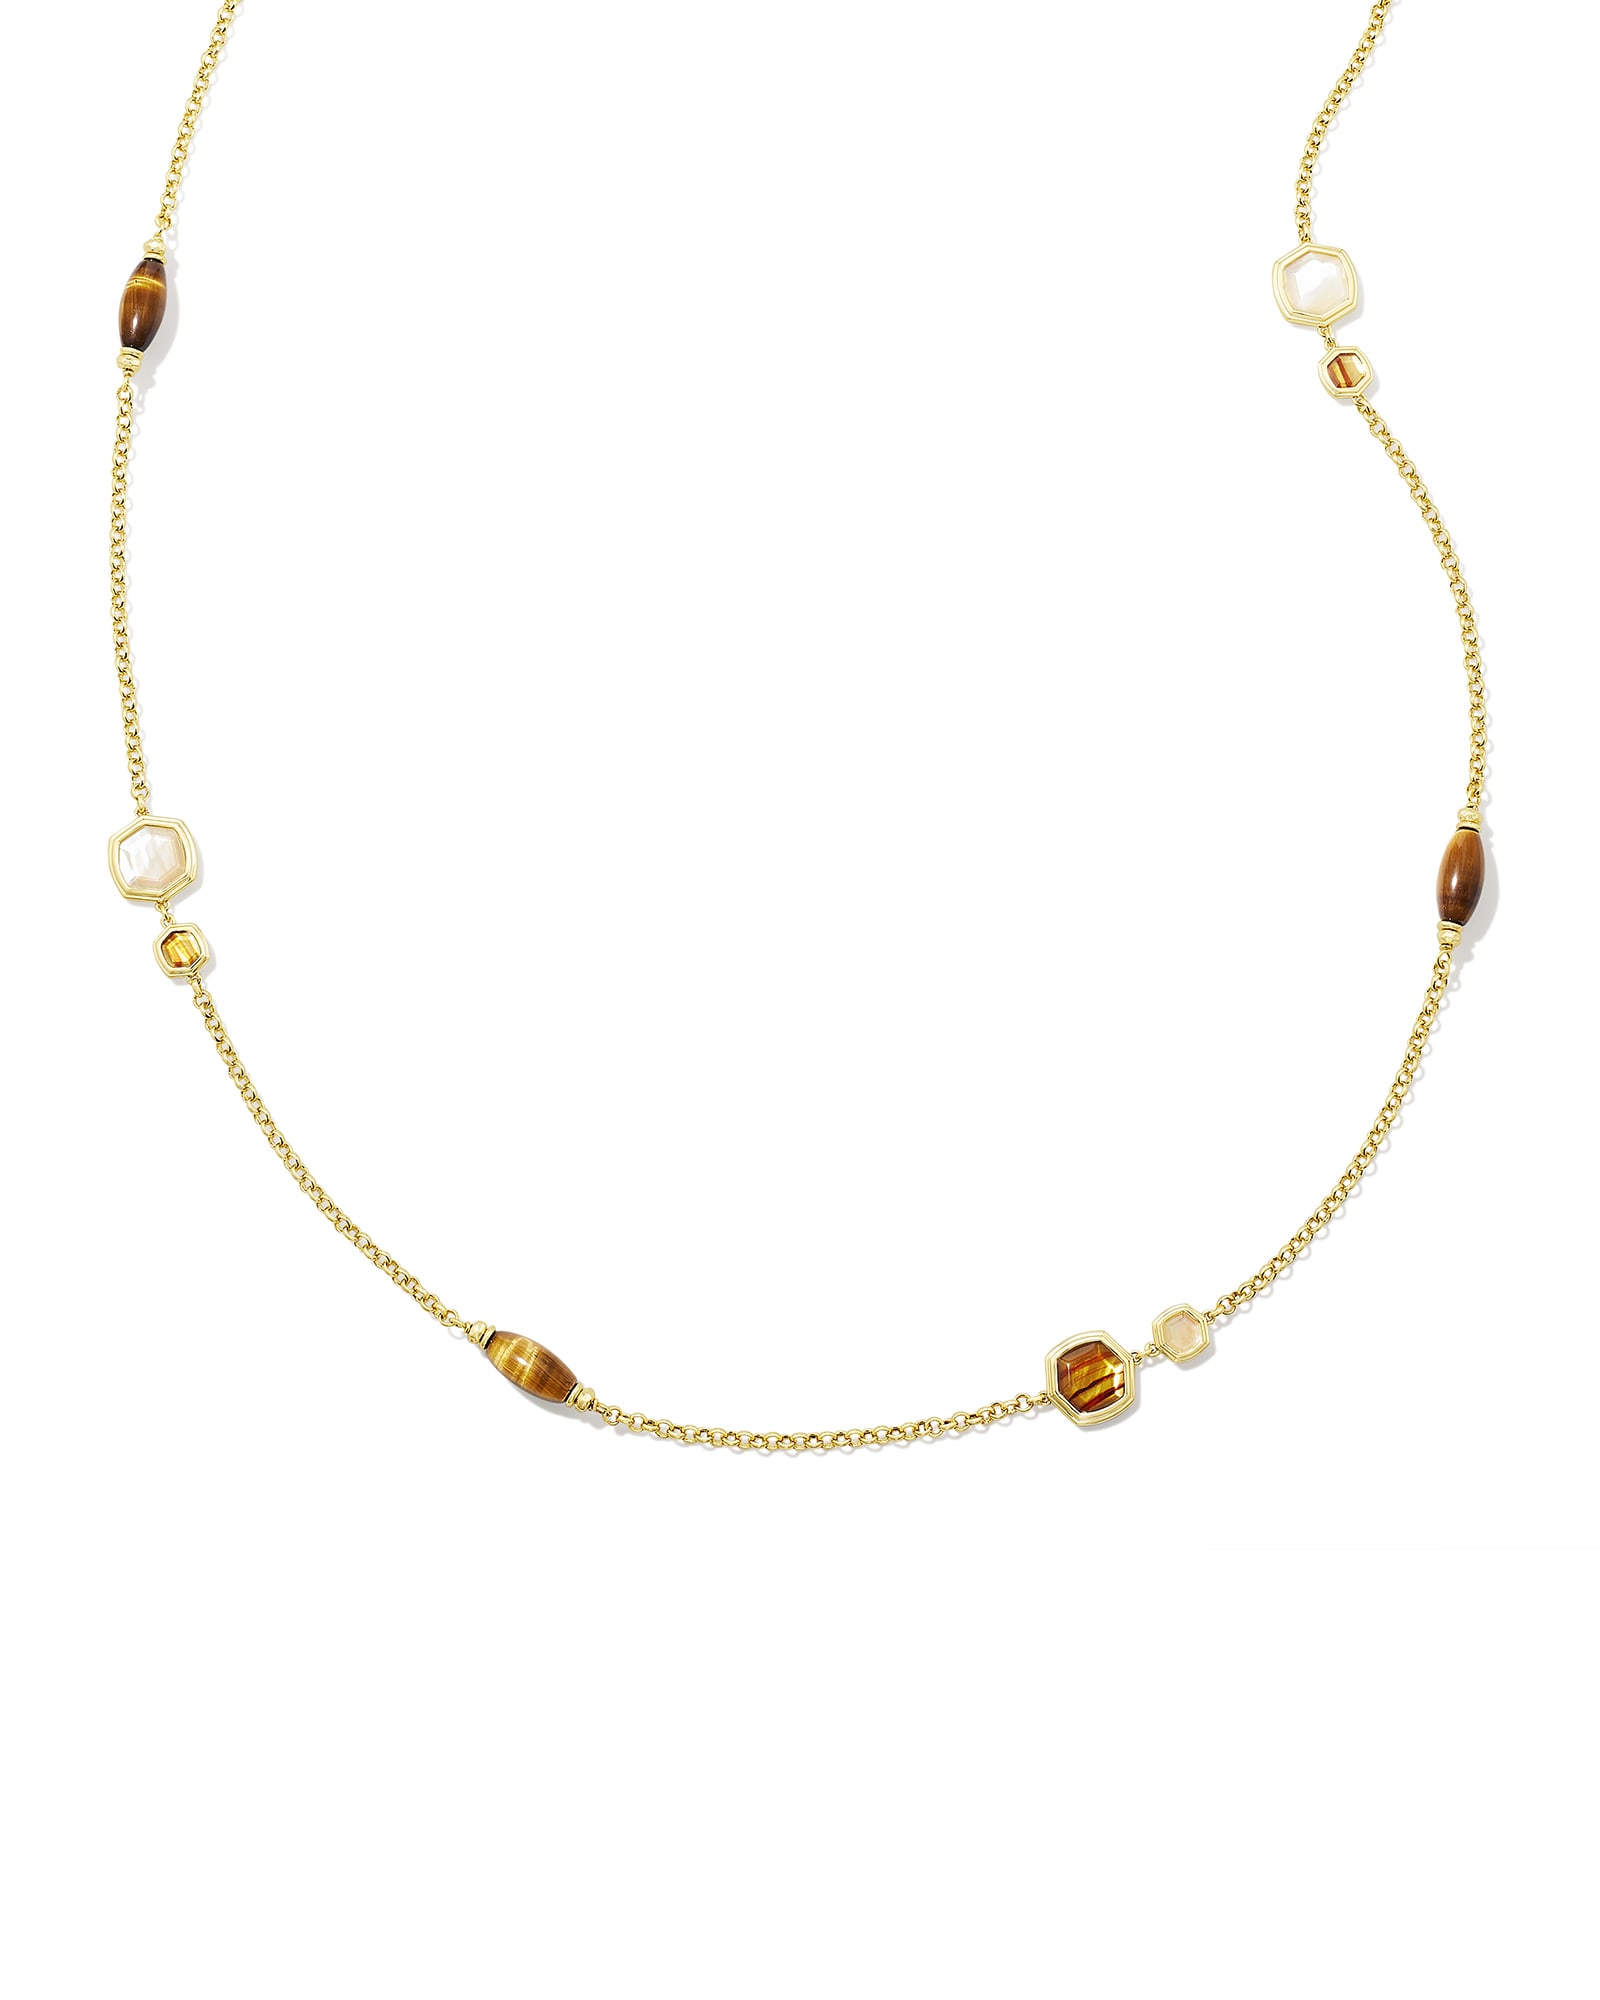 Monica Gold Long Strand Necklace in Brown Mix | Kendra Scott